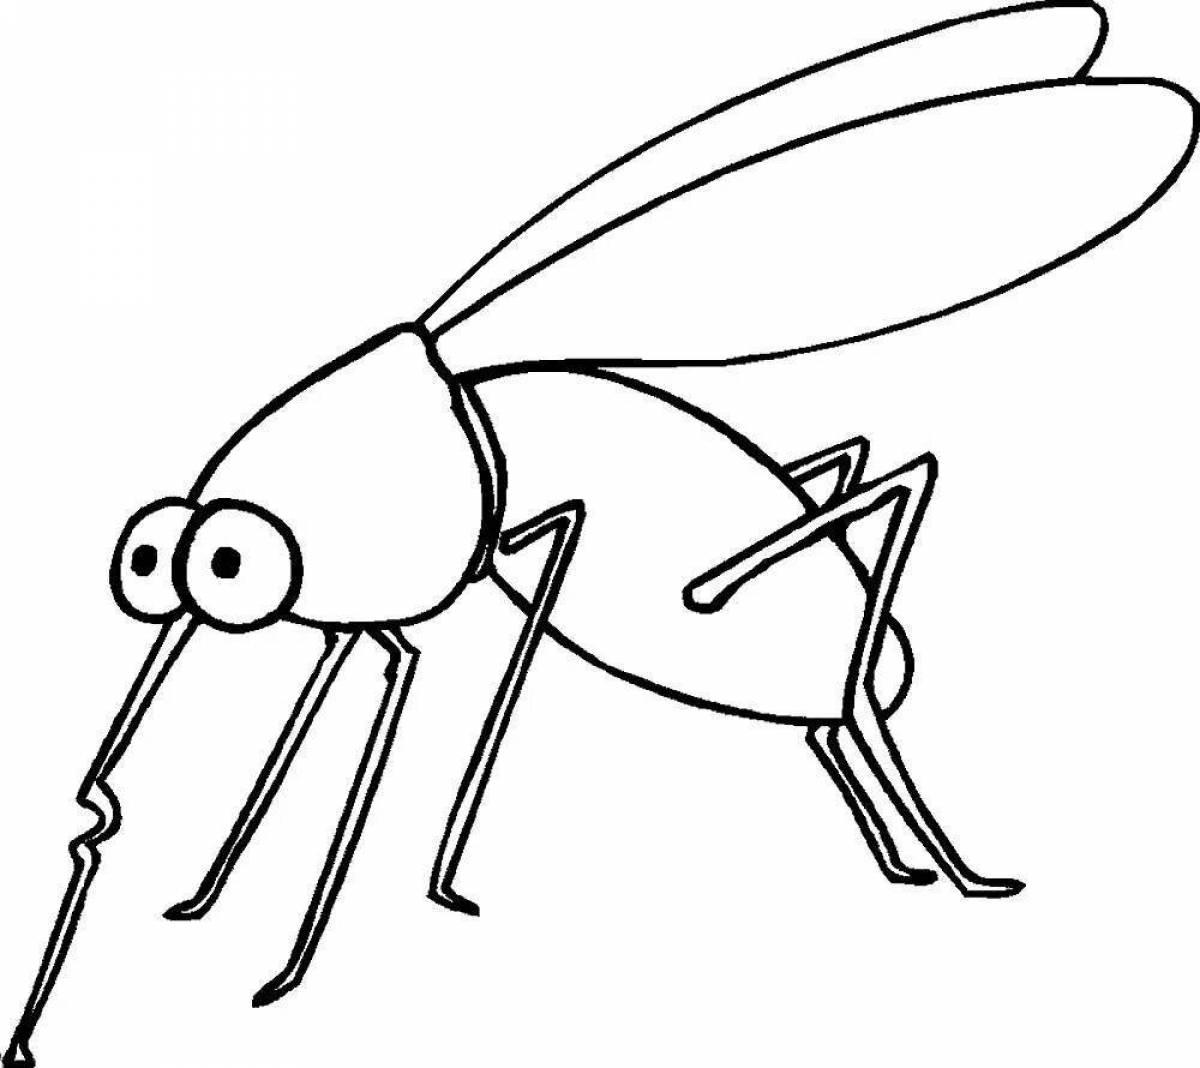 Fun coloring pages of insects for children 4-5 years old